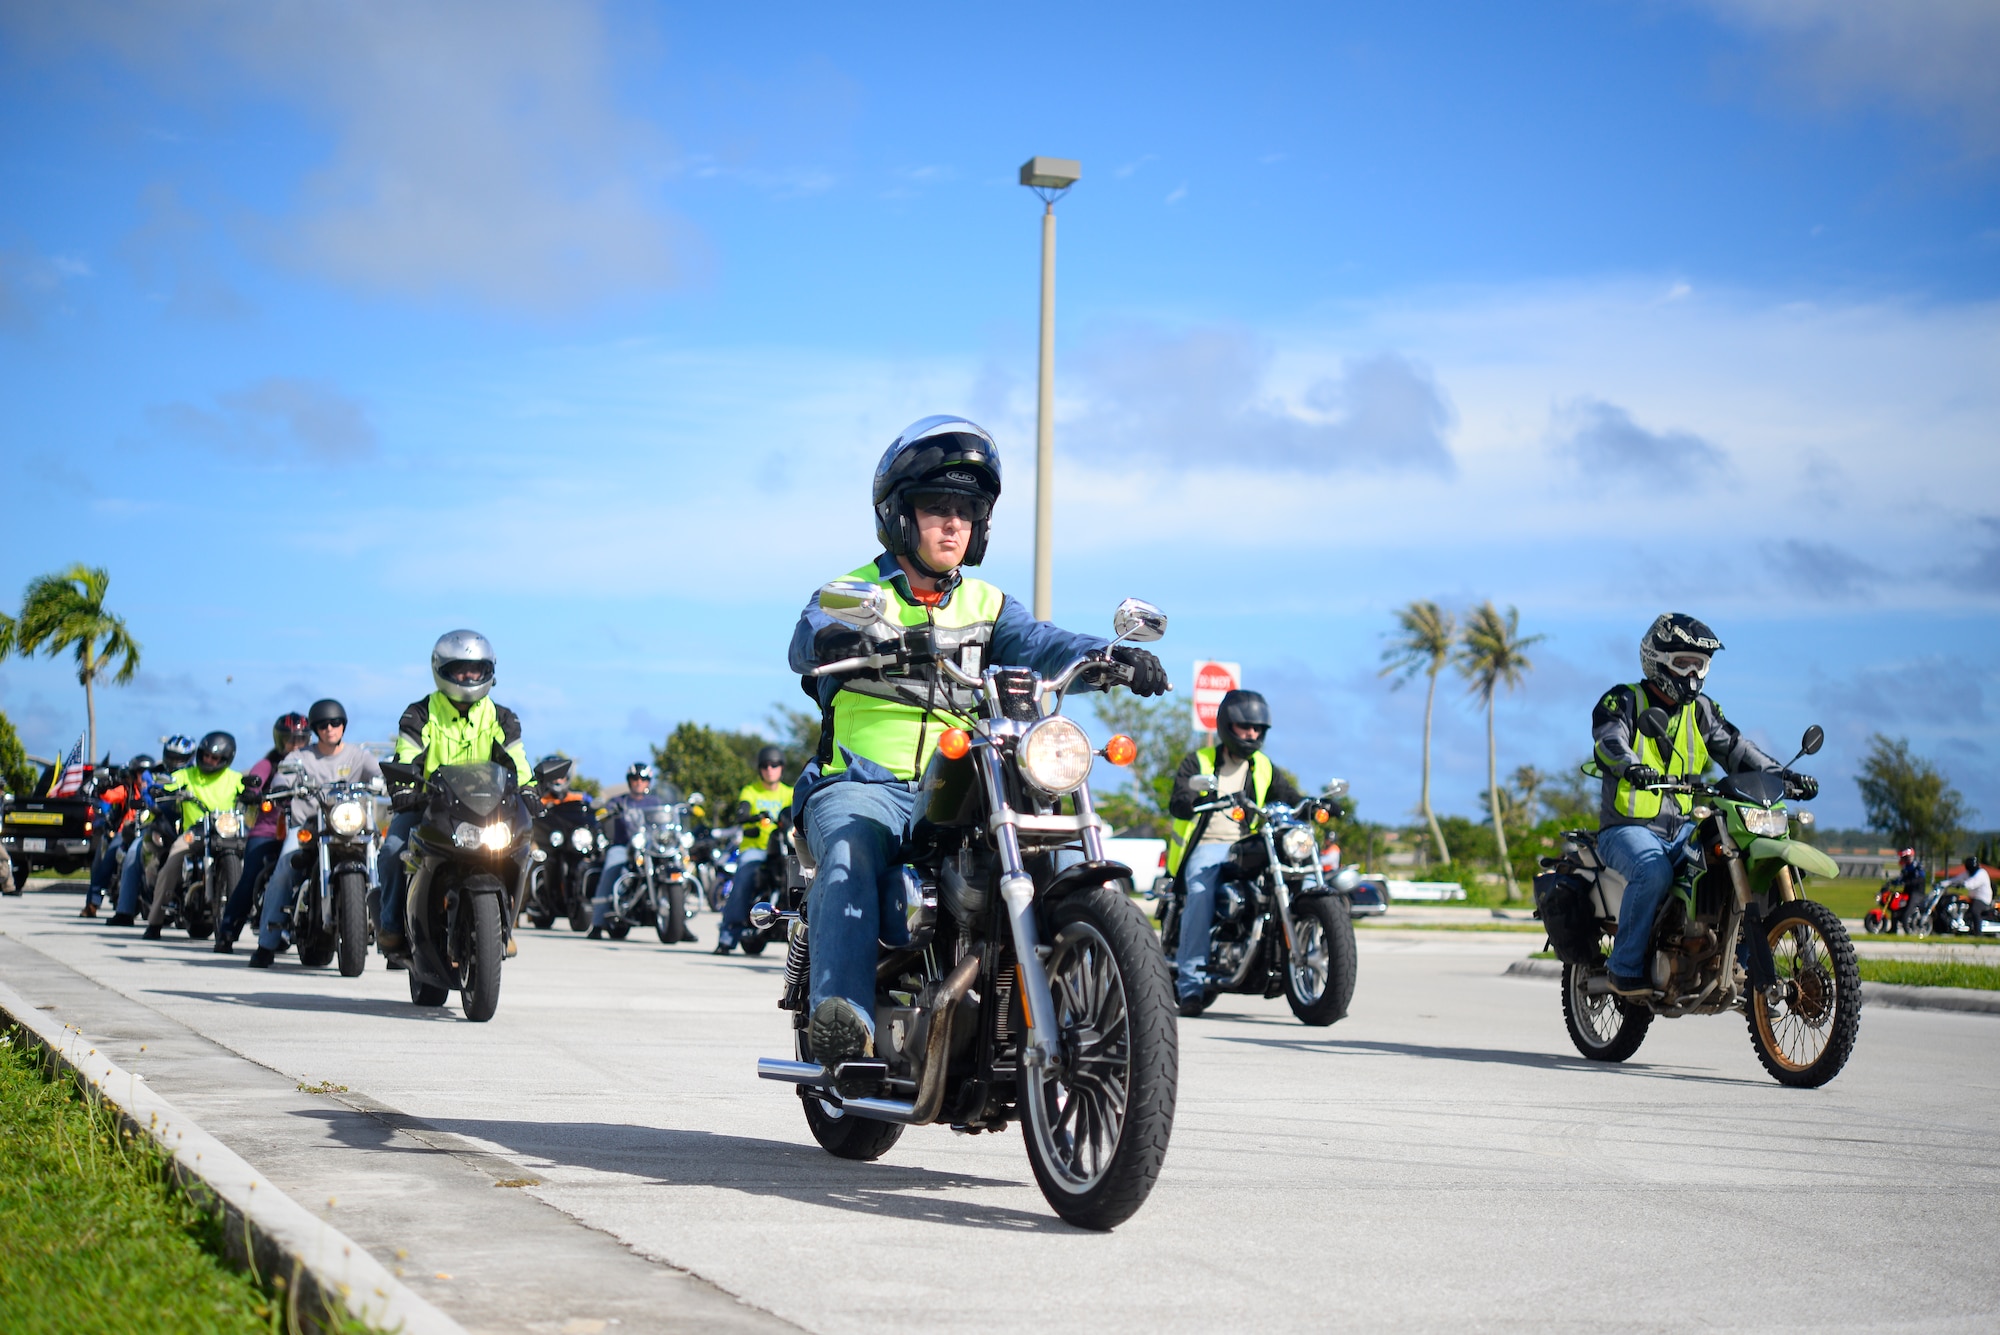 U.S. Air Force and Navy motorcyclists begin a mentorship ride Nov. 6, 2015, at Andersen Air Force Base, Guam. Riders used the opportunity to check personal protective equipment and hone safe group riding practices. (U.S. Air Force photo by Staff Sgt. Alexander W. Riedel/Released) 